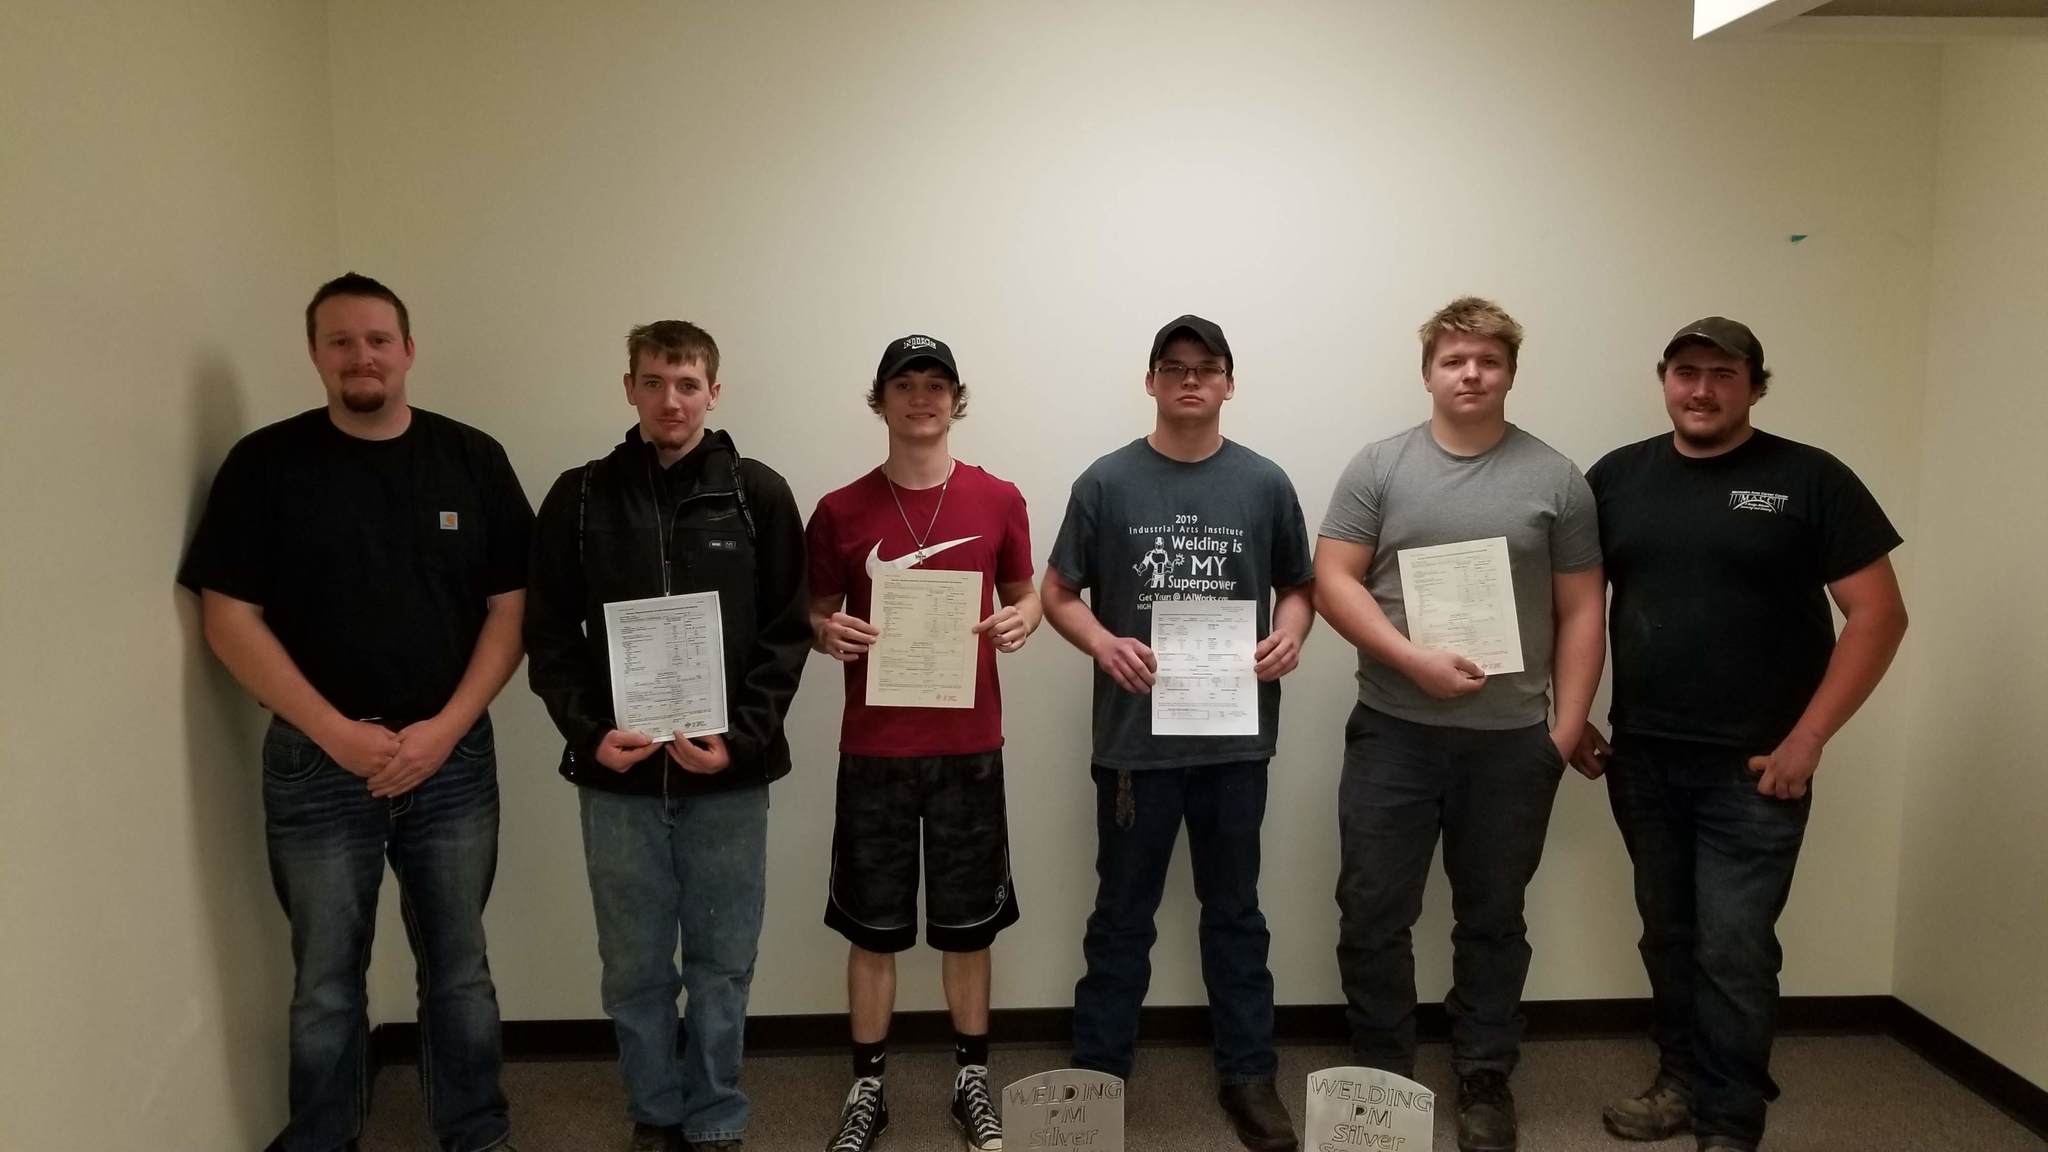 Mr. Deal, Mr. Daggett, and students that passed state qualification tests.